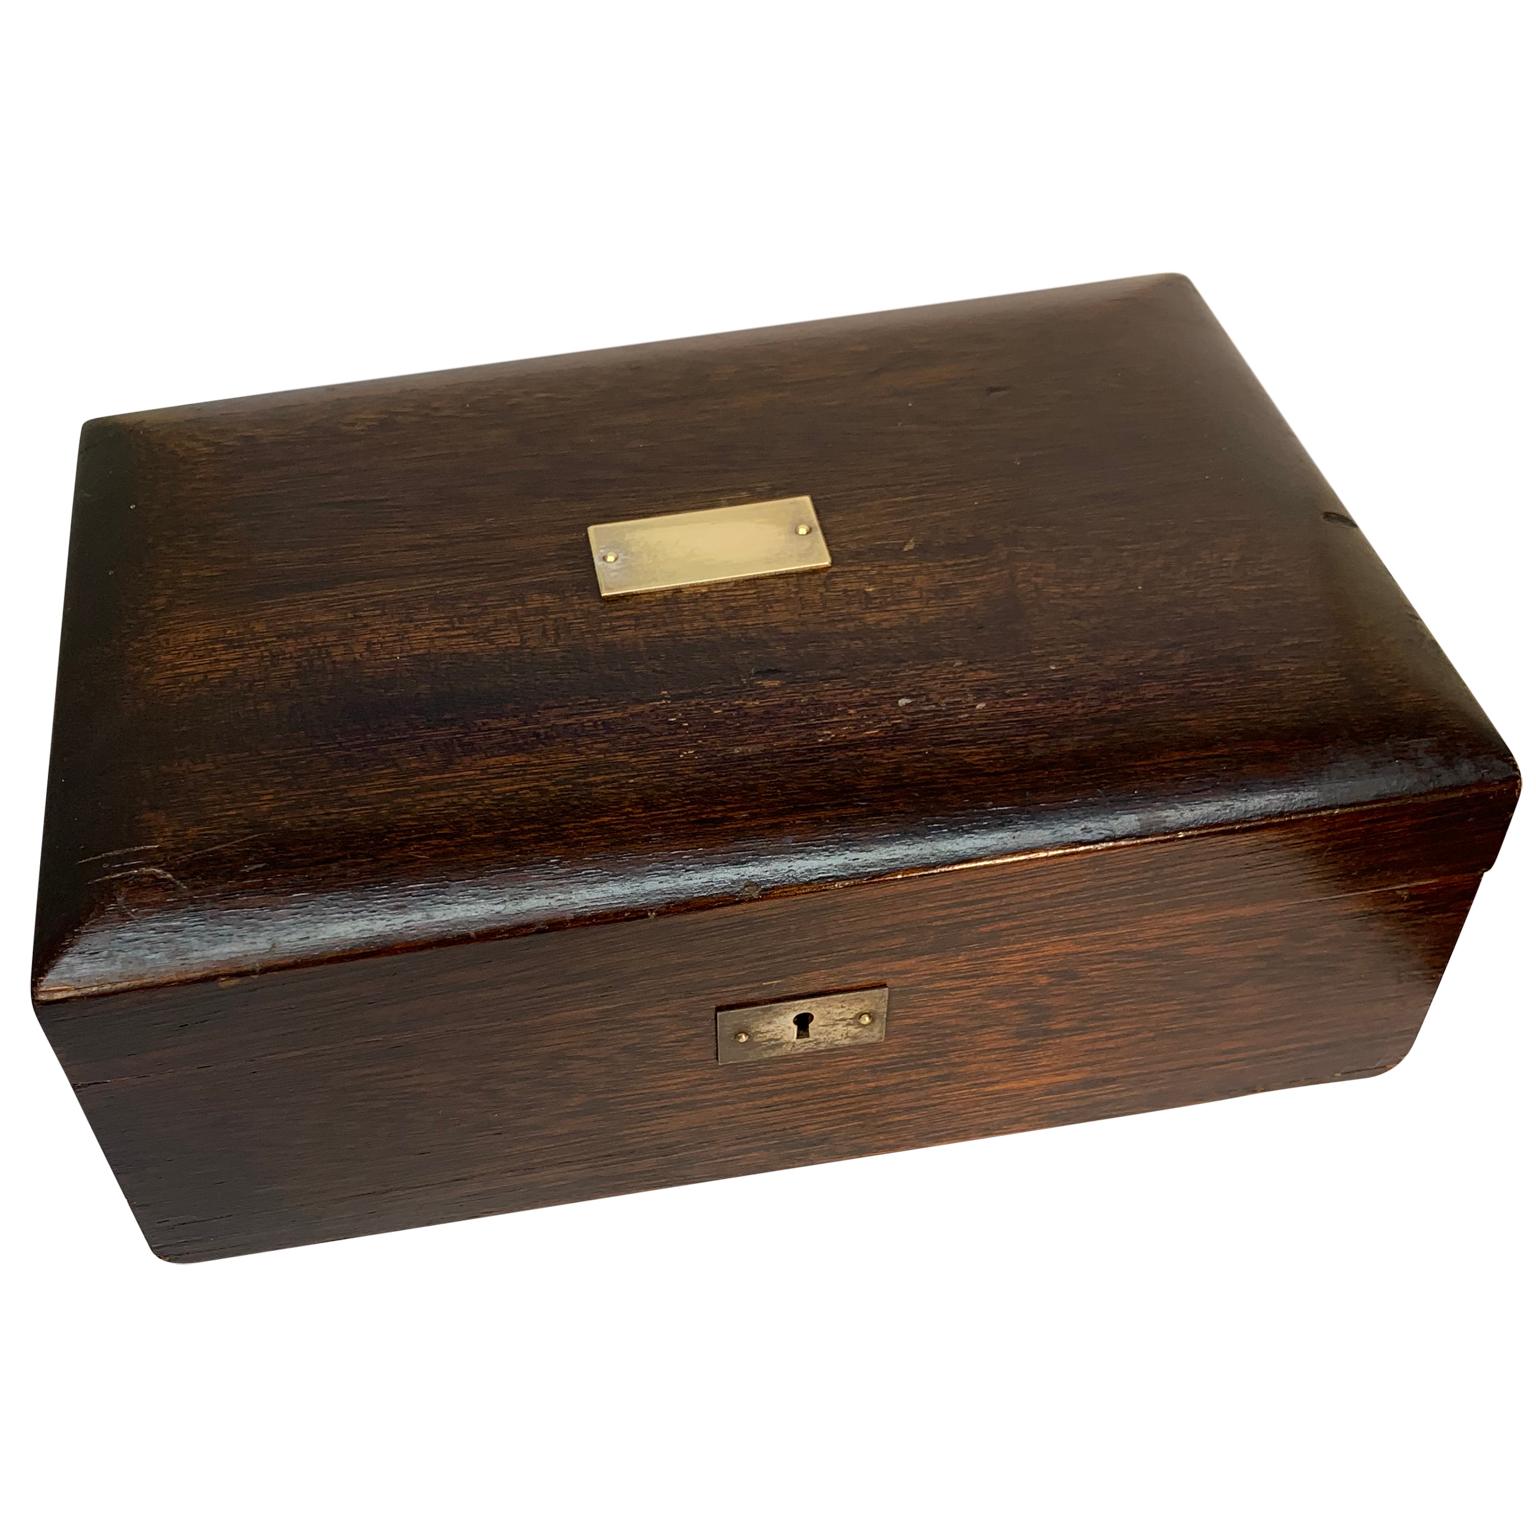 Late 19th century wooden box with polished zinc insert and brass plaque

Brass plaque has not been engraved.